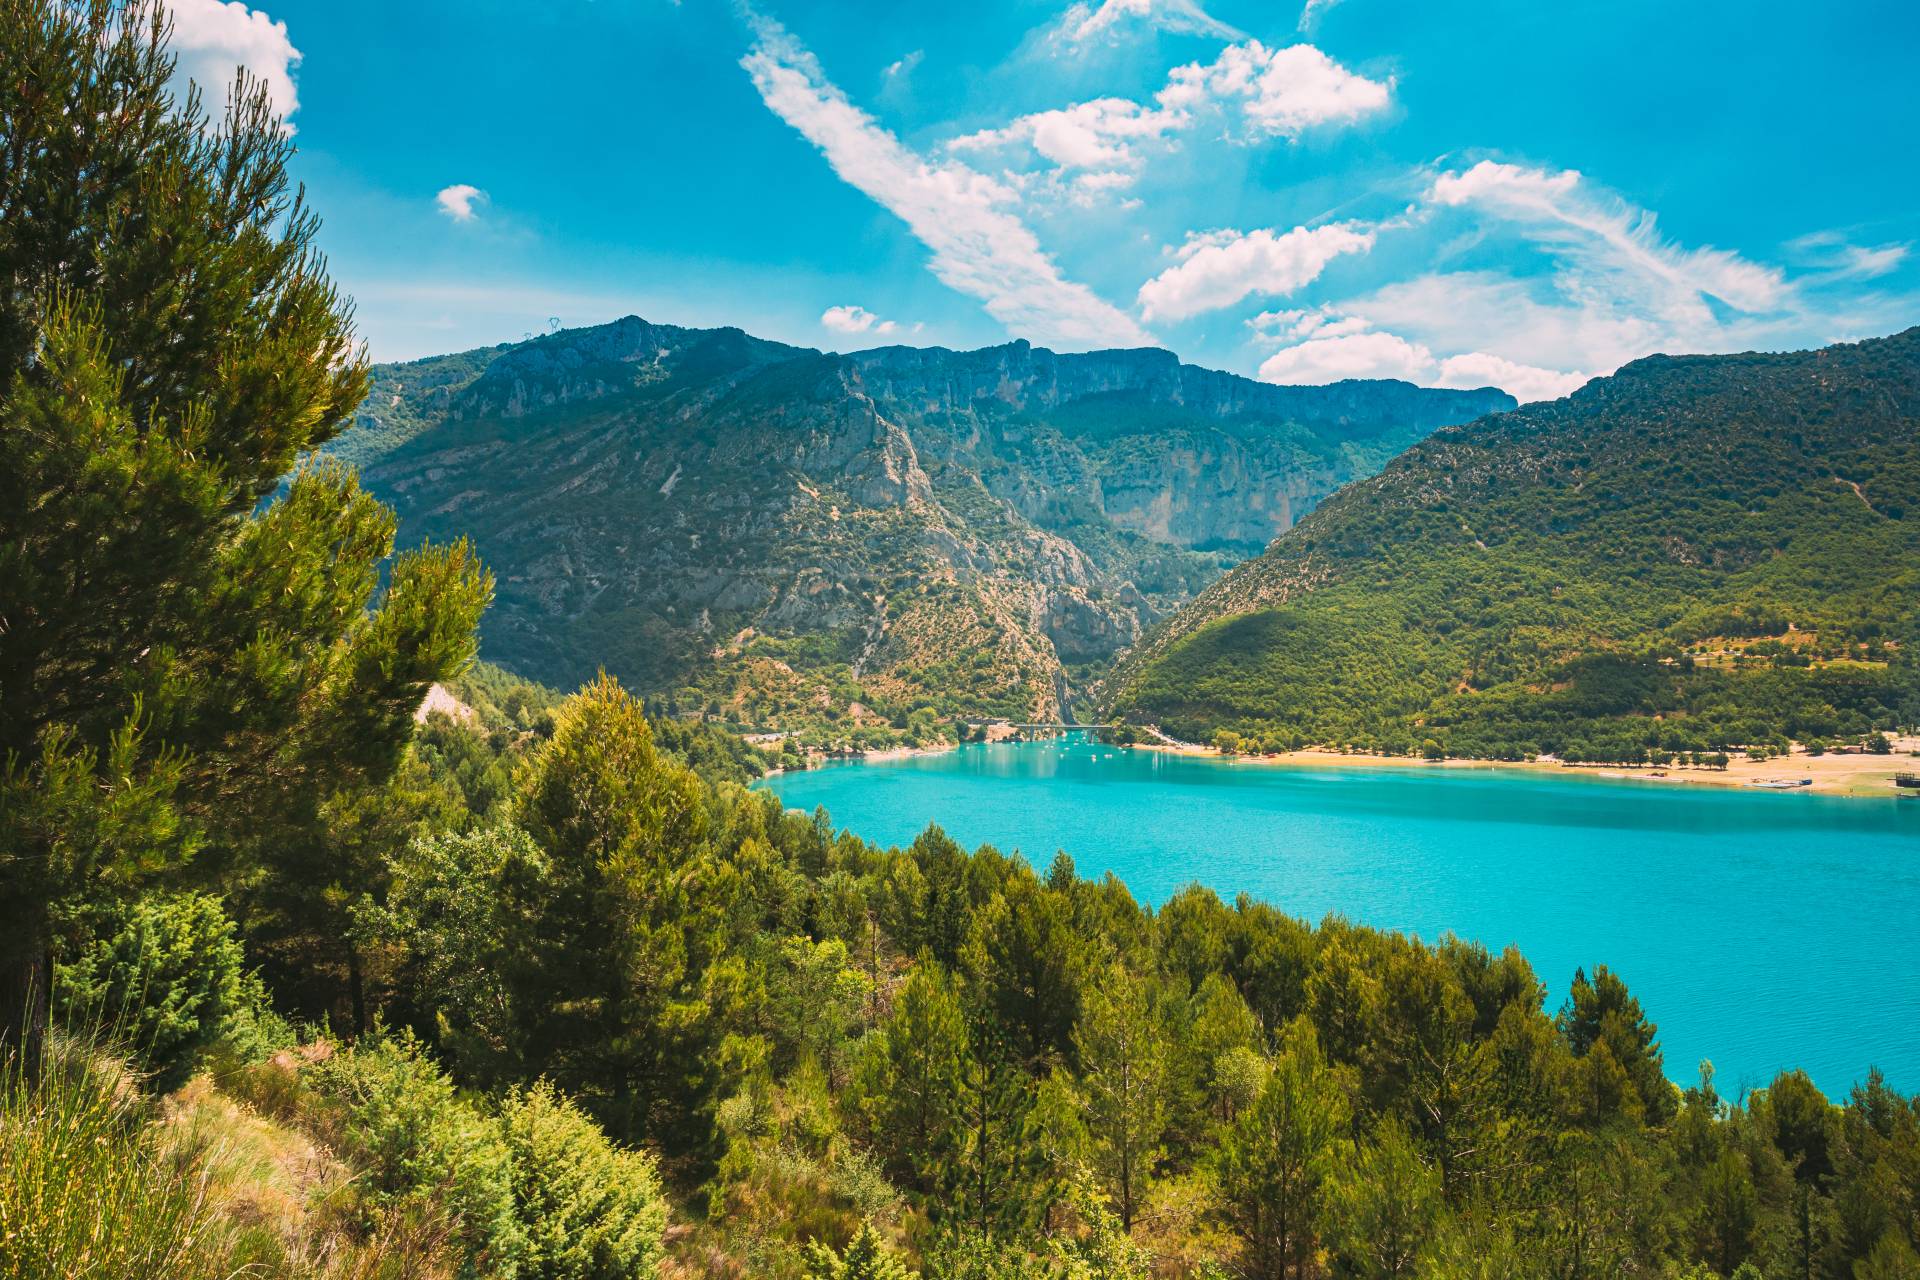 Tours From Nice To Verdon Gorge